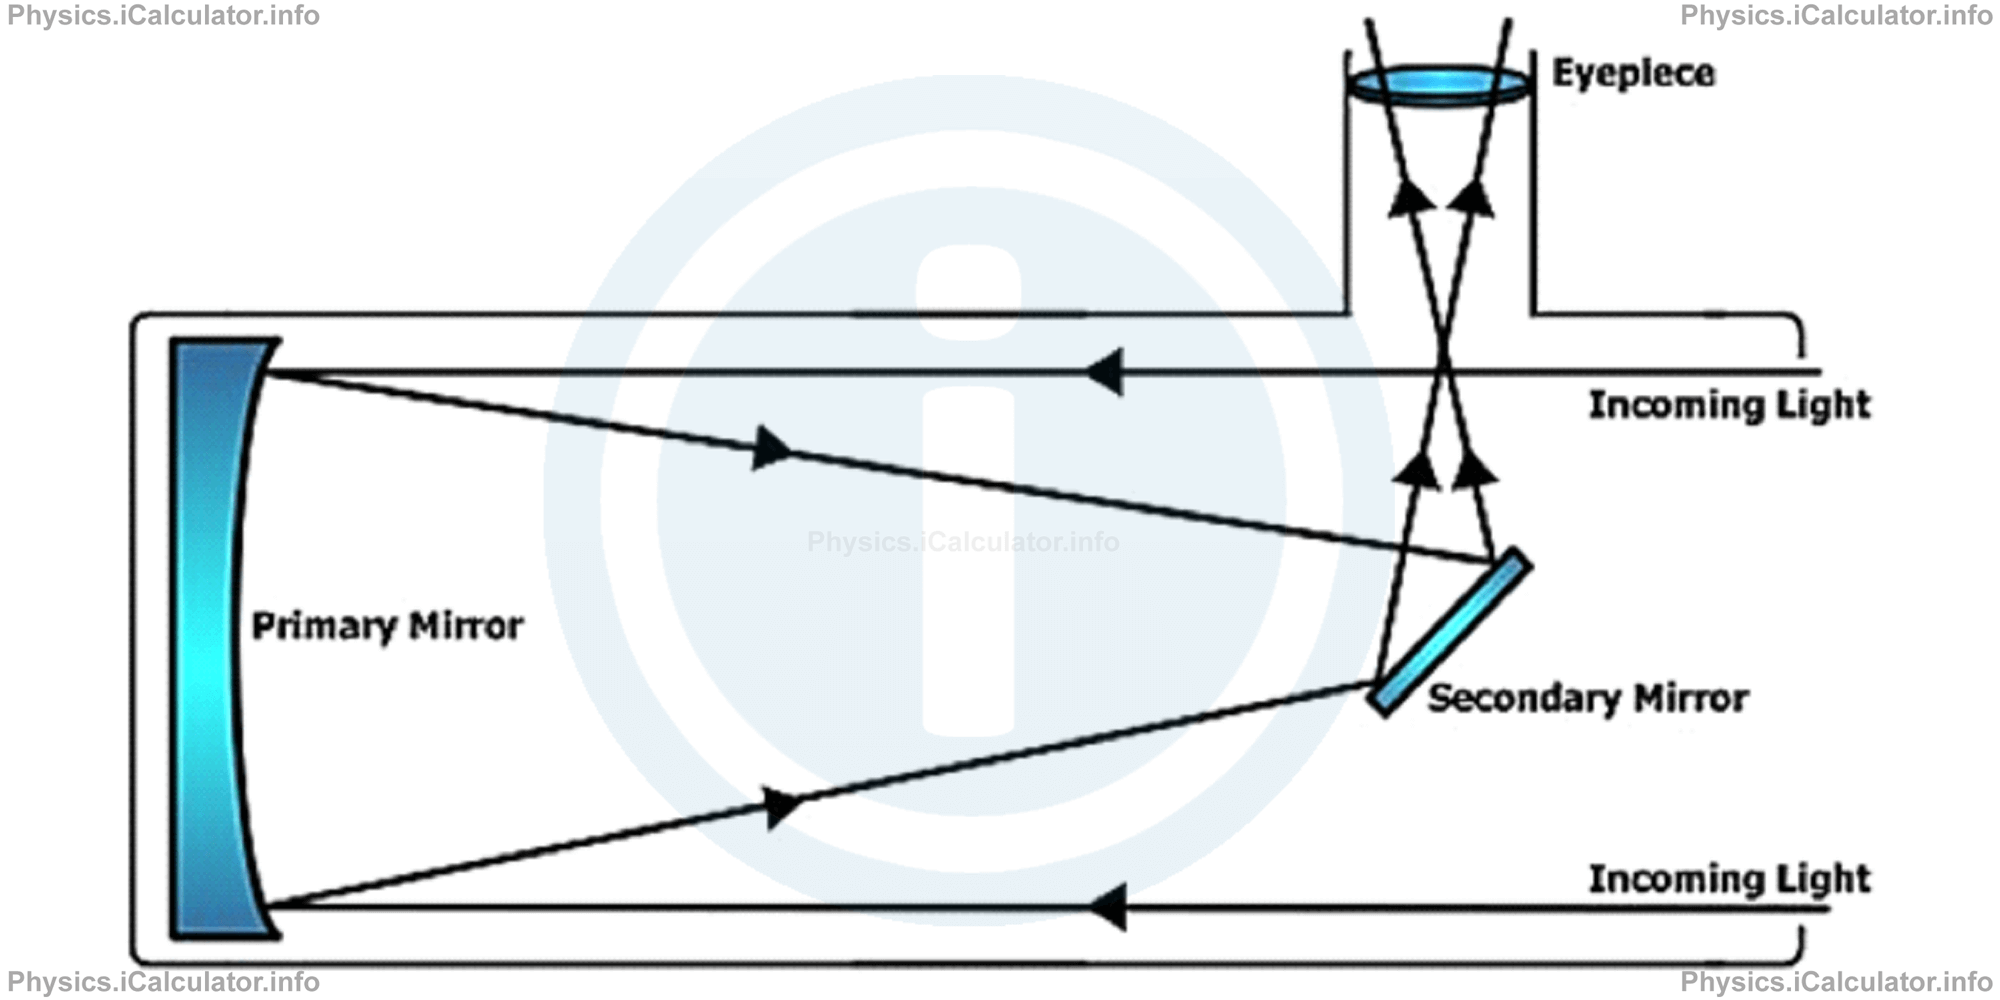 Physics Tutorials: This image provides the diagram of a mirror telescope